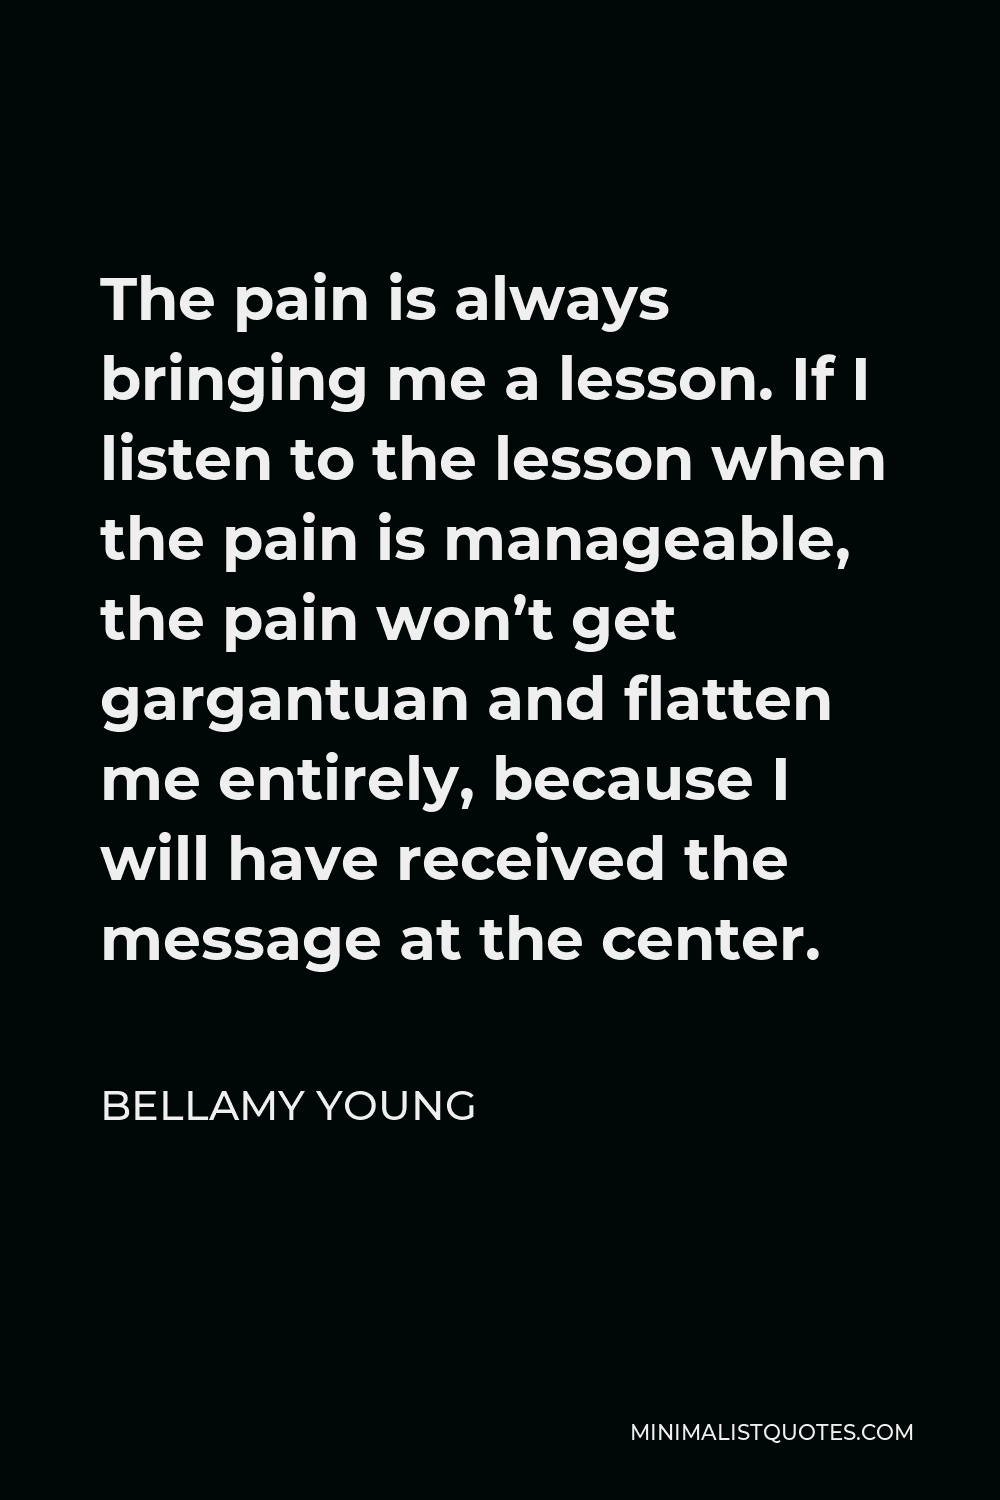 Bellamy Young Quote - The pain is always bringing me a lesson. If I listen to the lesson when the pain is manageable, the pain won’t get gargantuan and flatten me entirely, because I will have received the message at the center.